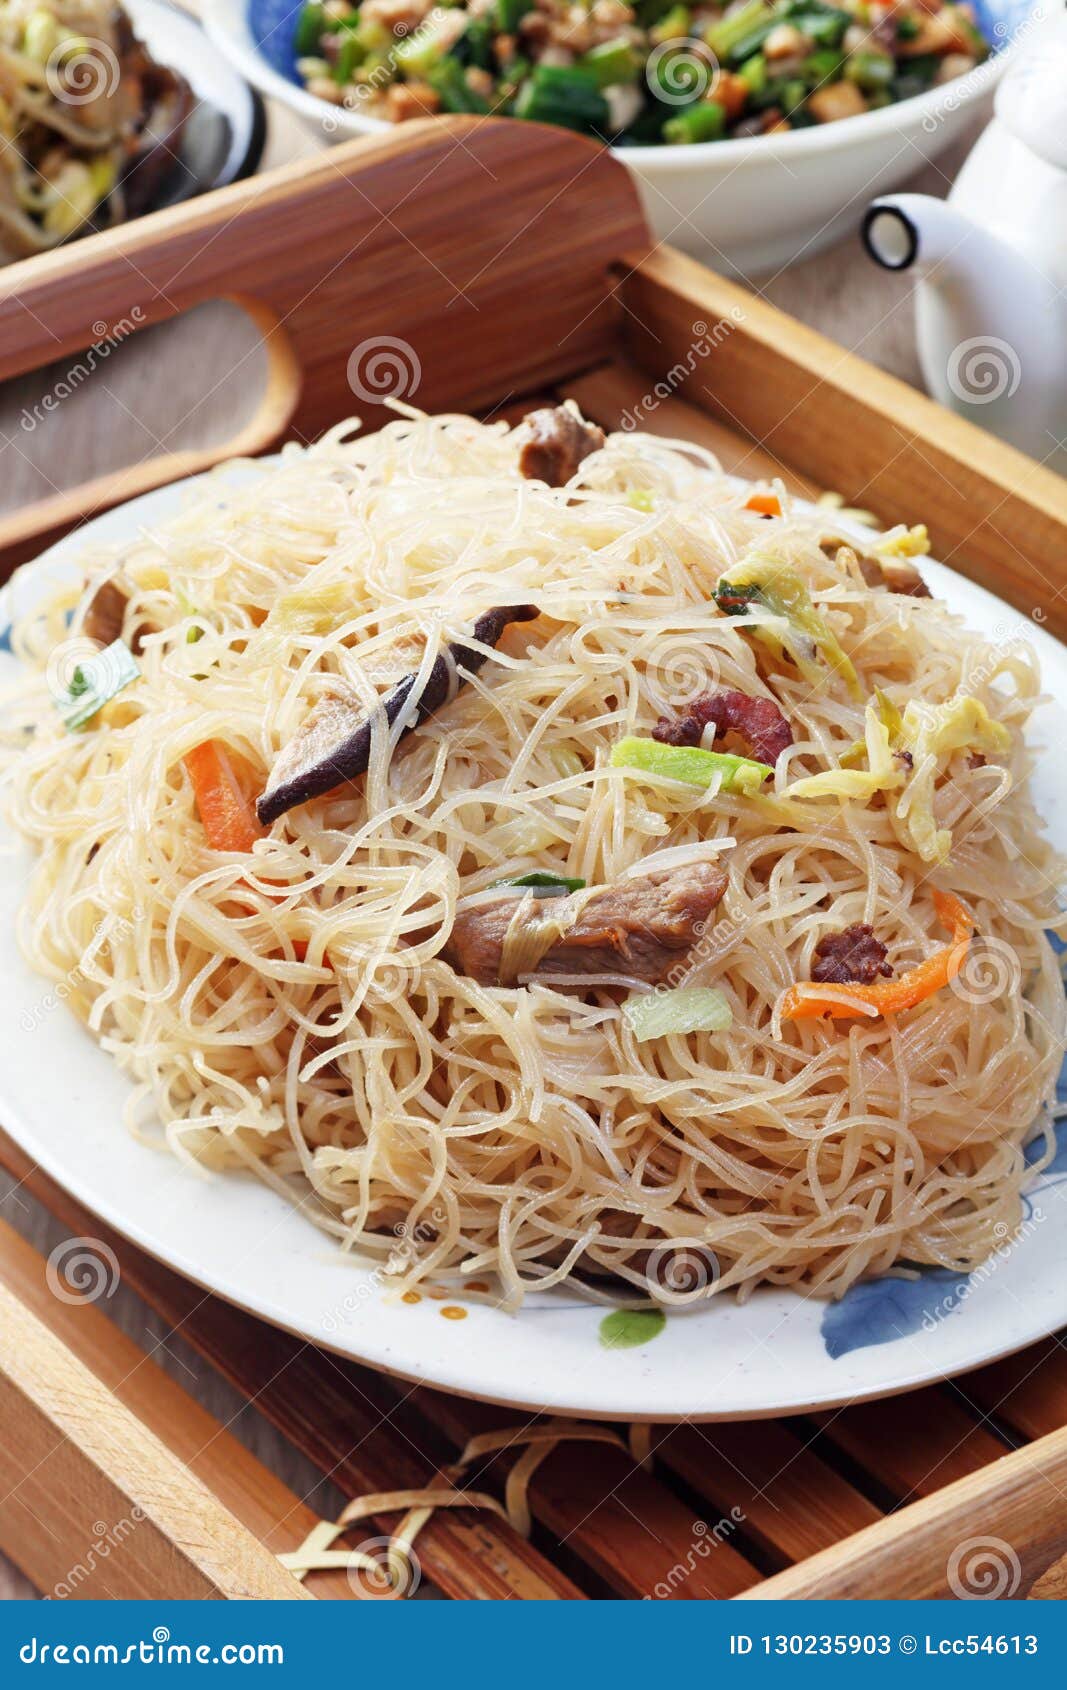 Stir fried rice noodles stock image. Image of delicious - 130235903